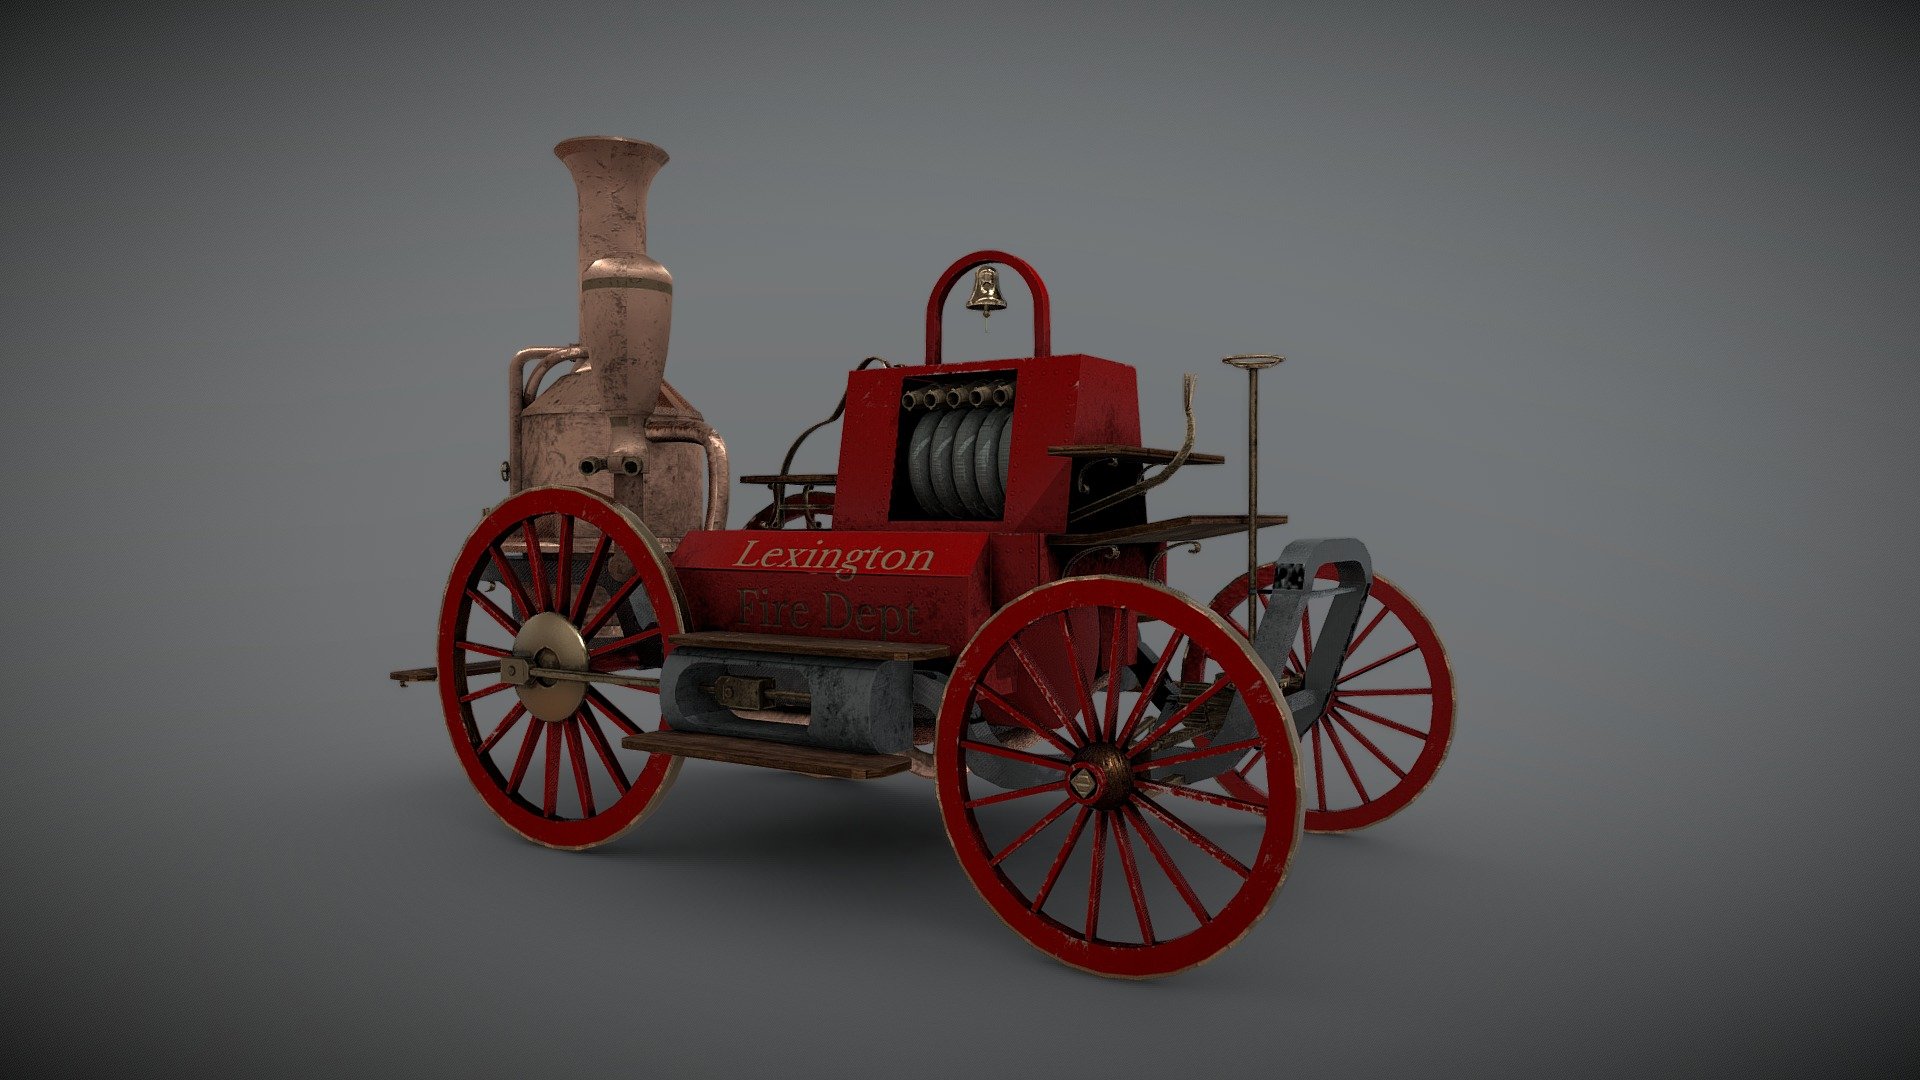 A steam powered version of a late 1700s fire engine that was traditionally pulled by horses.
Made as a static environment prop as part of steampunk inspired final project for my Masters degree: &ldquo;The Clockwork Corsair